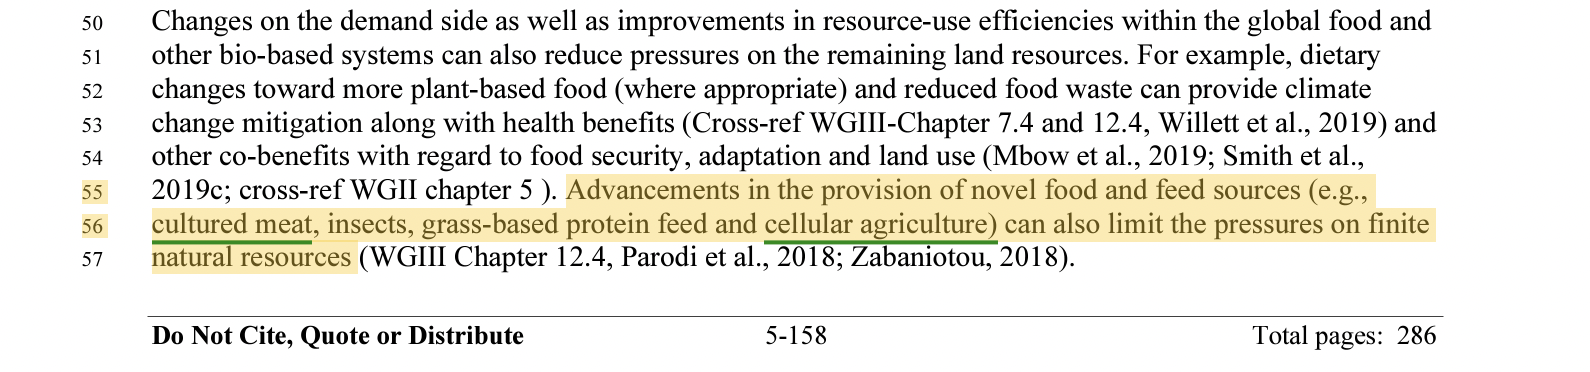 Screenshot of chapter 5 page 158 of the IPCC WGII Sixth Assessment Report where cultured meat and cellular agriculture are mentioned as ways to limit the pressures on finite natural resources.